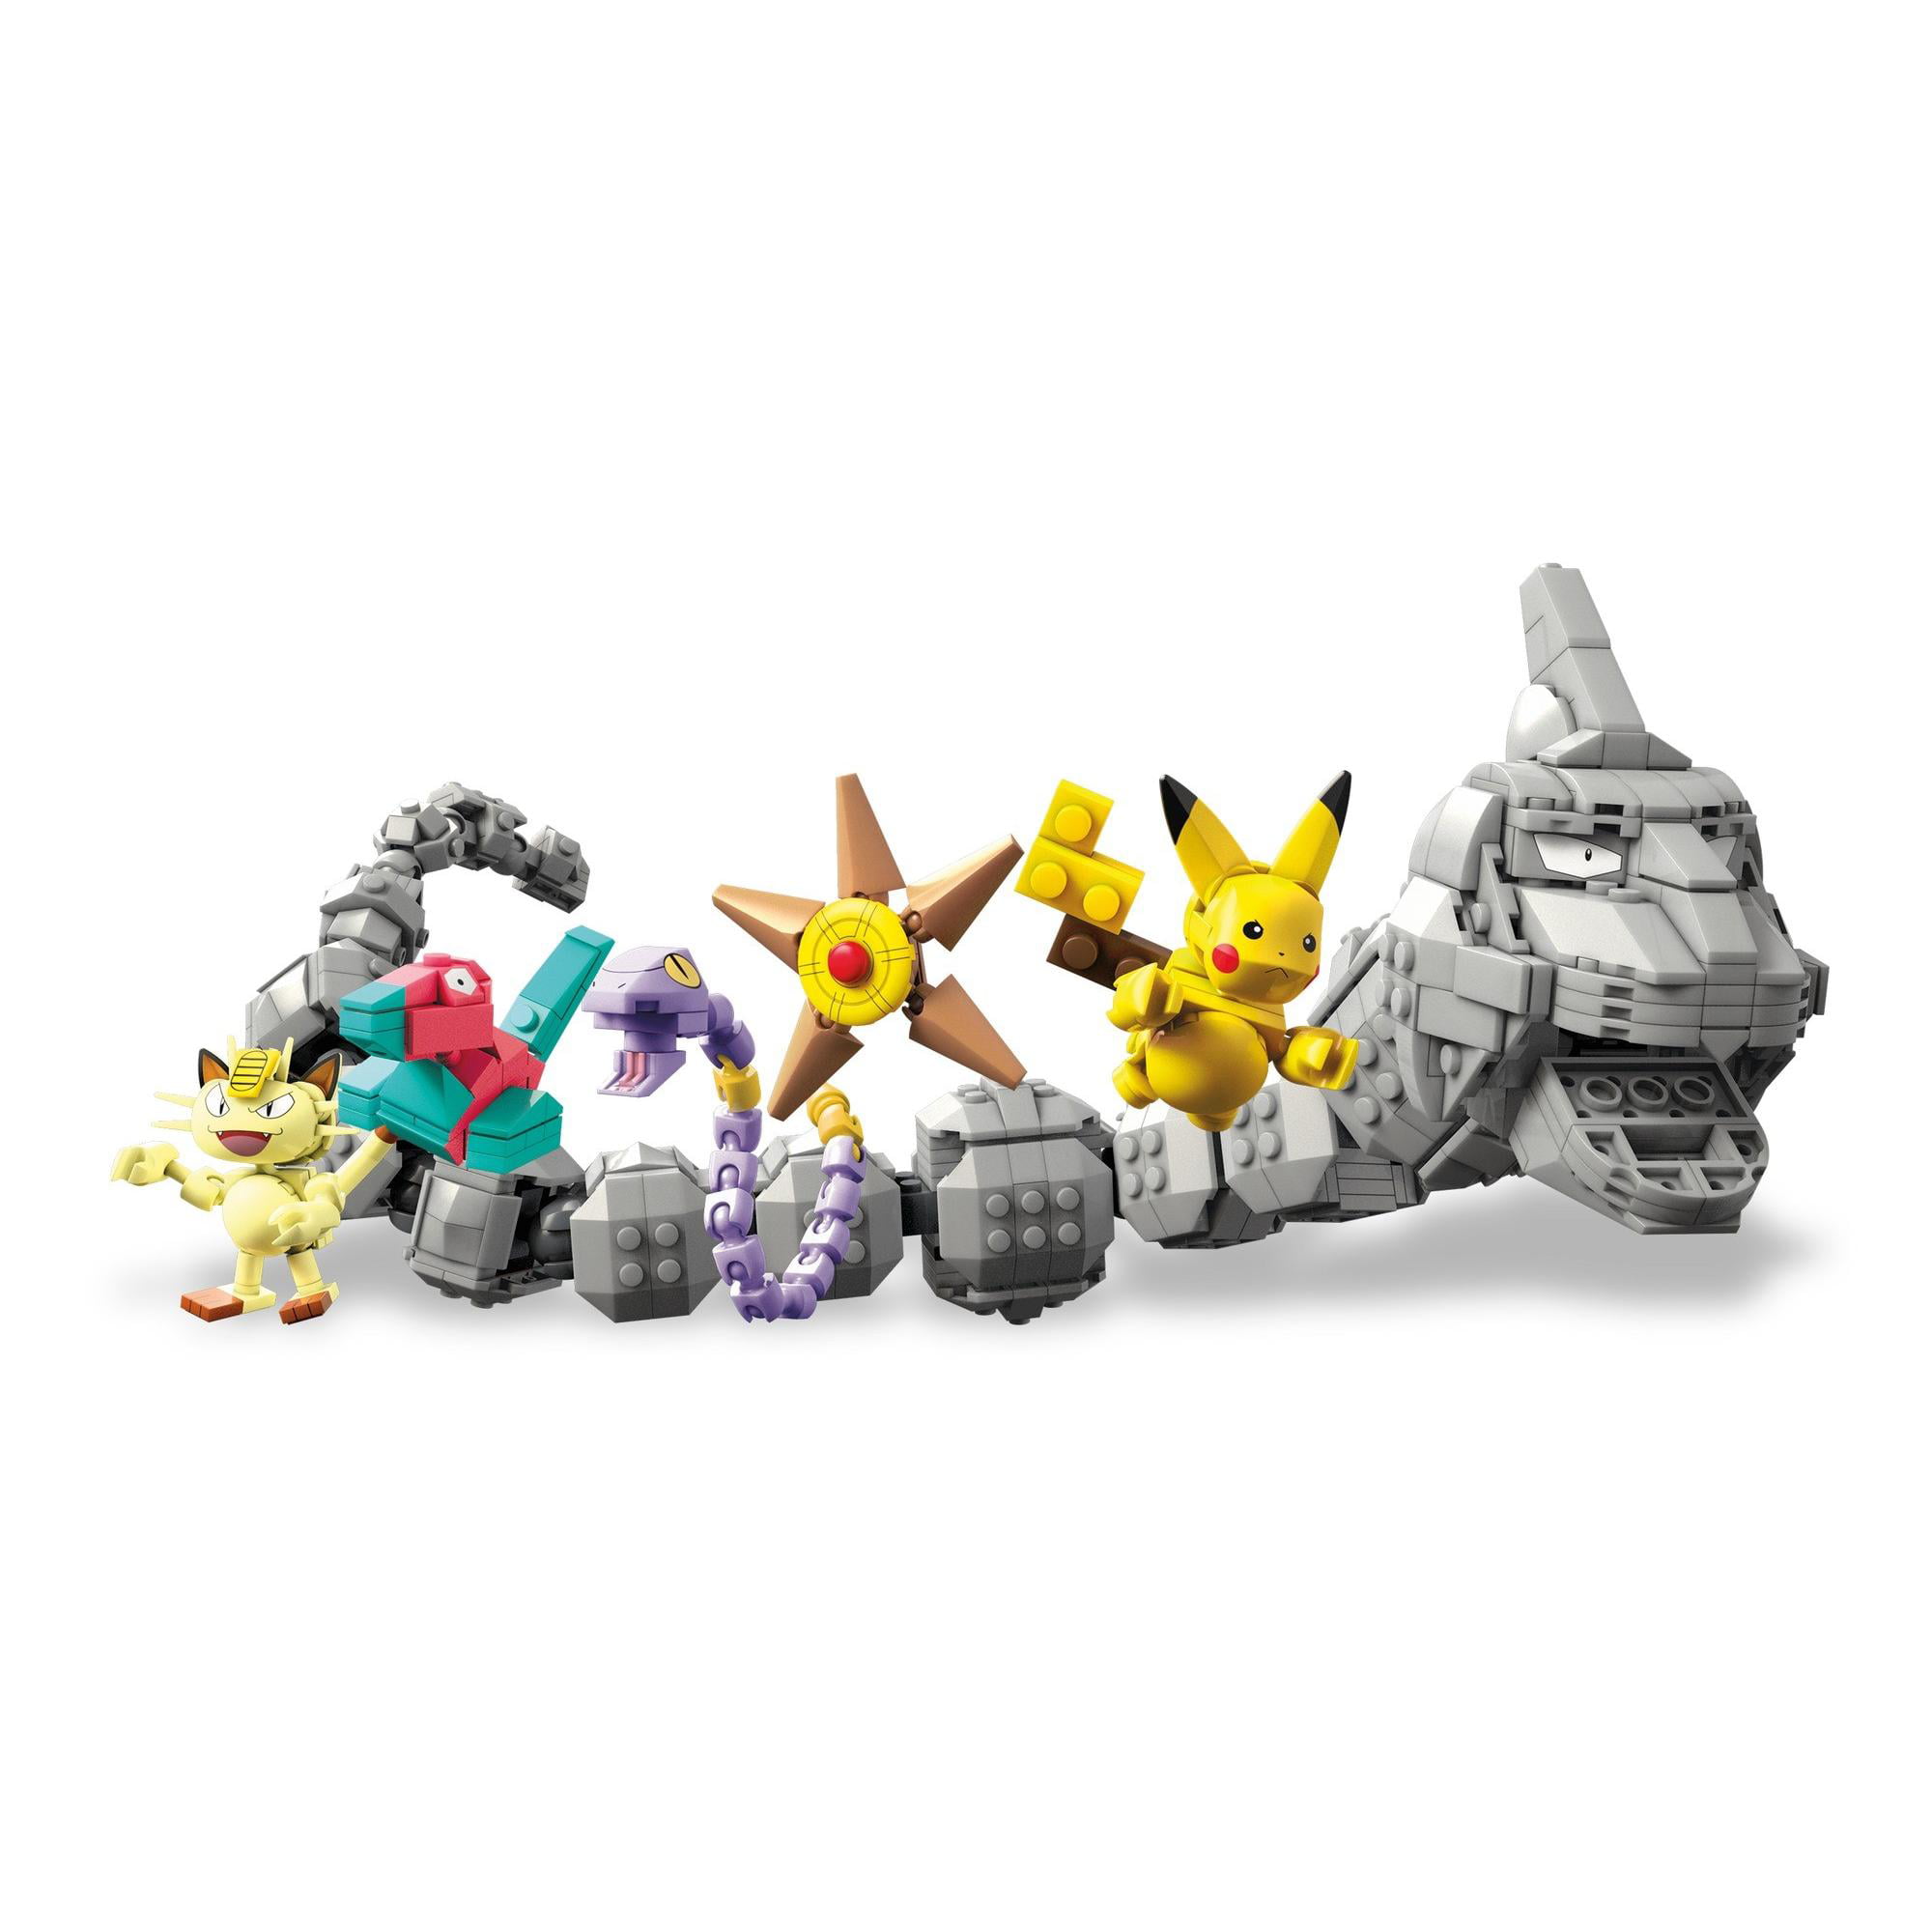 Mr Toys Toyworld - Why is Onix's attack so incredibly low? 😂 😎   c/o @pokemon_dailyyyy